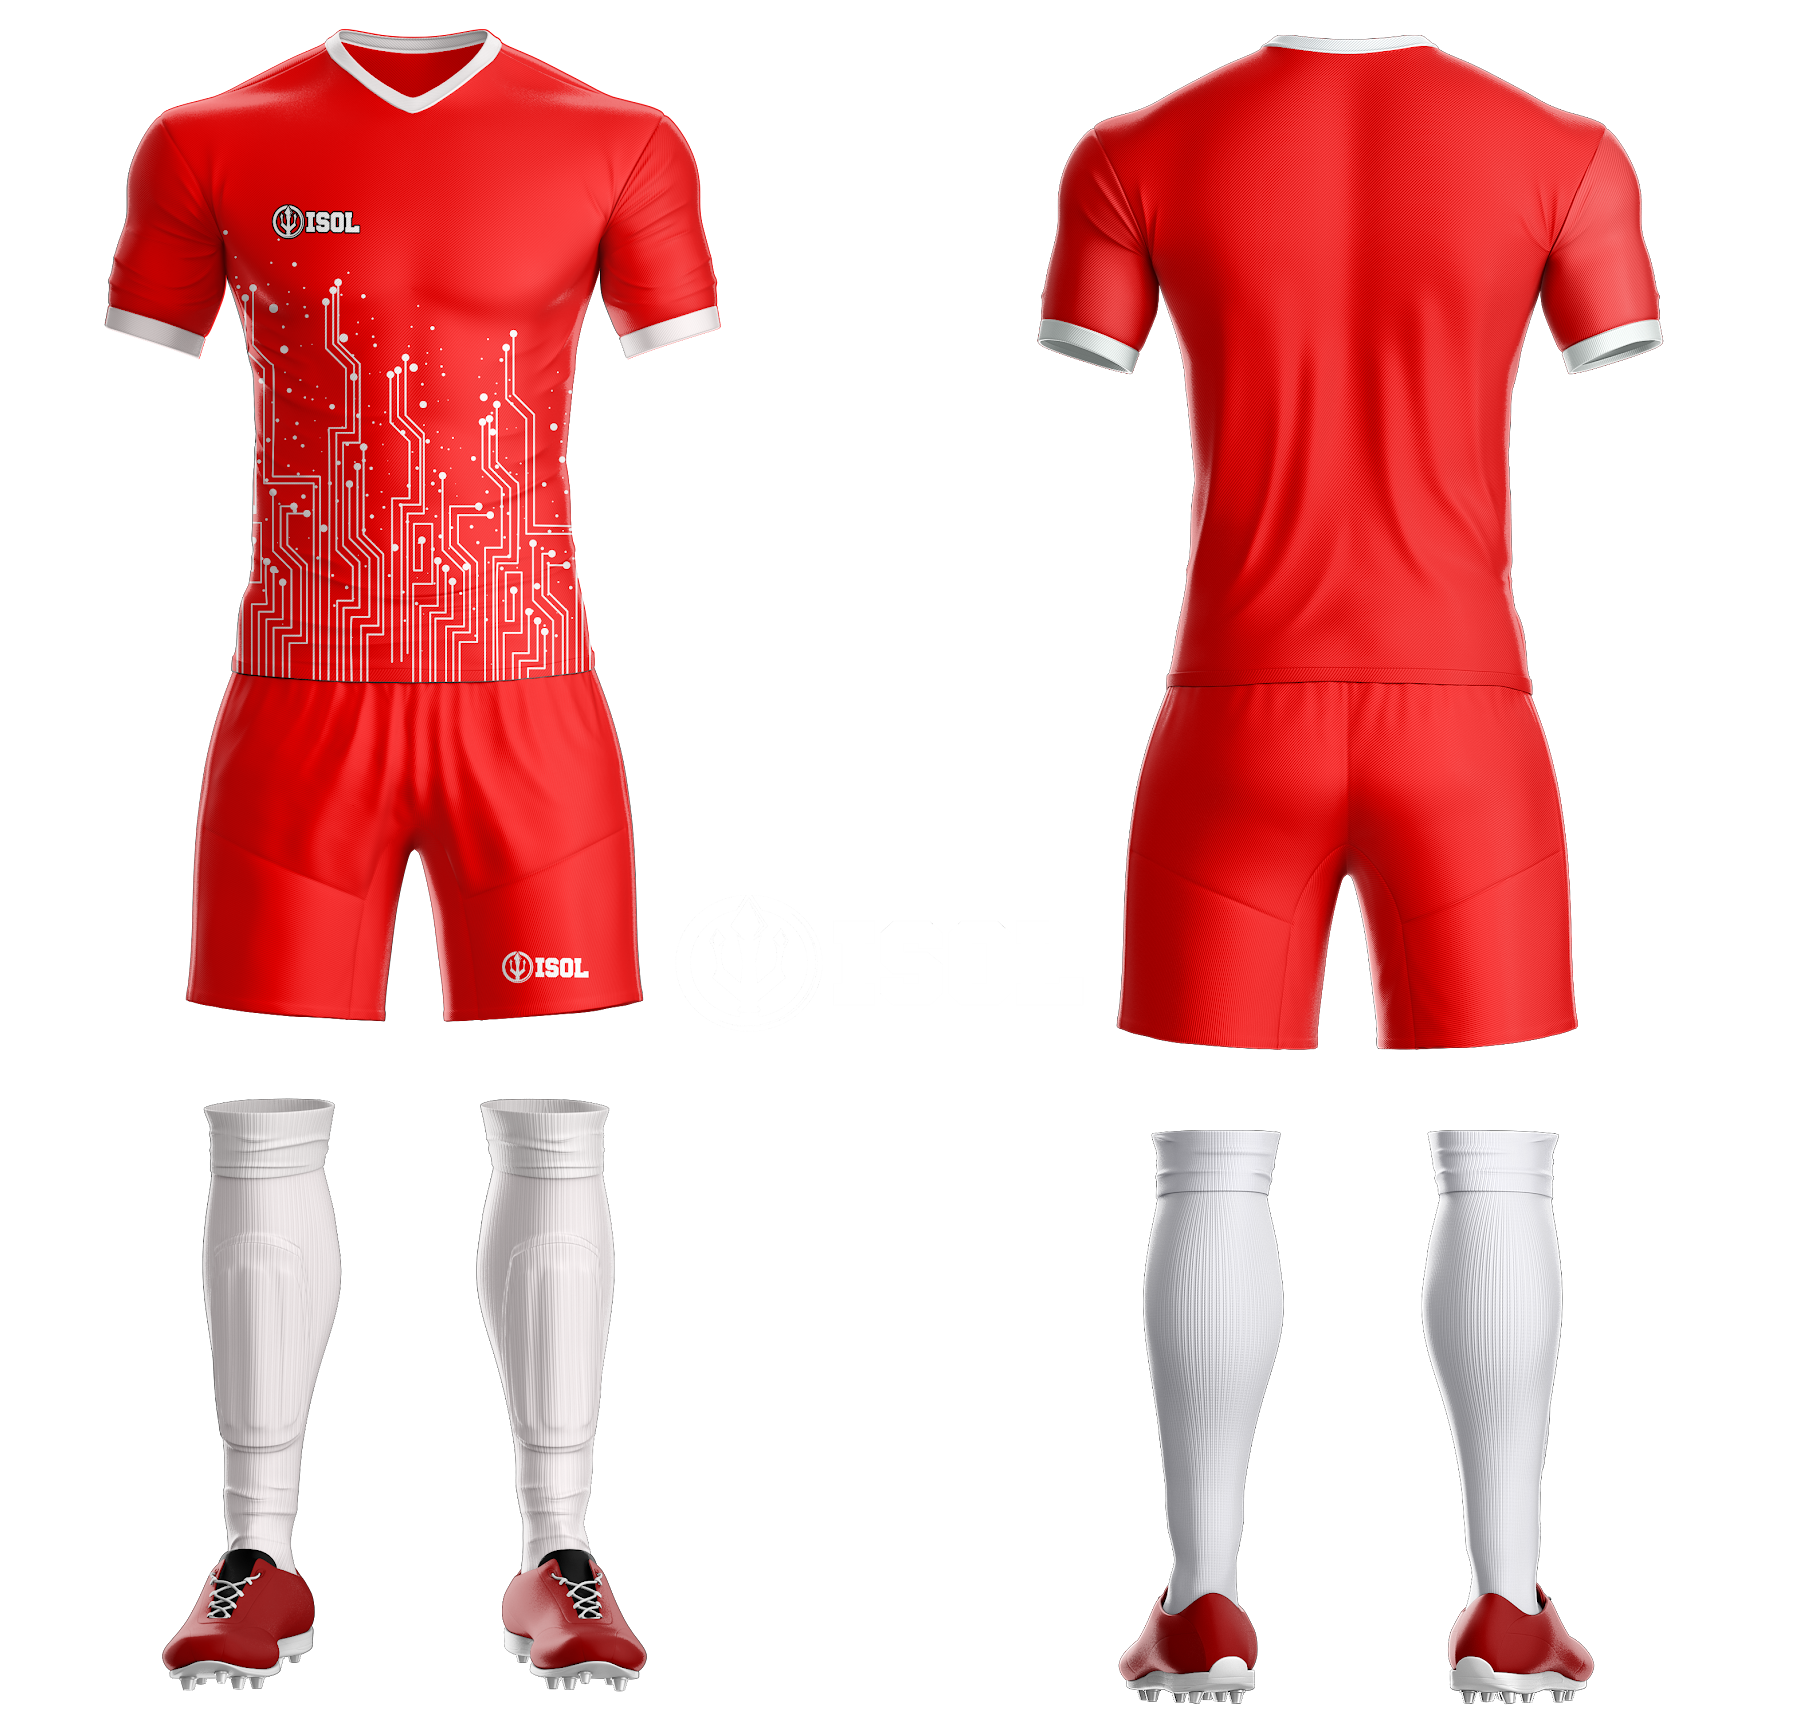 Download 365+ Mentahan Mockup Jersey Futsal Polos Png Popular Mockups free packaging mockups from the trusted websites.